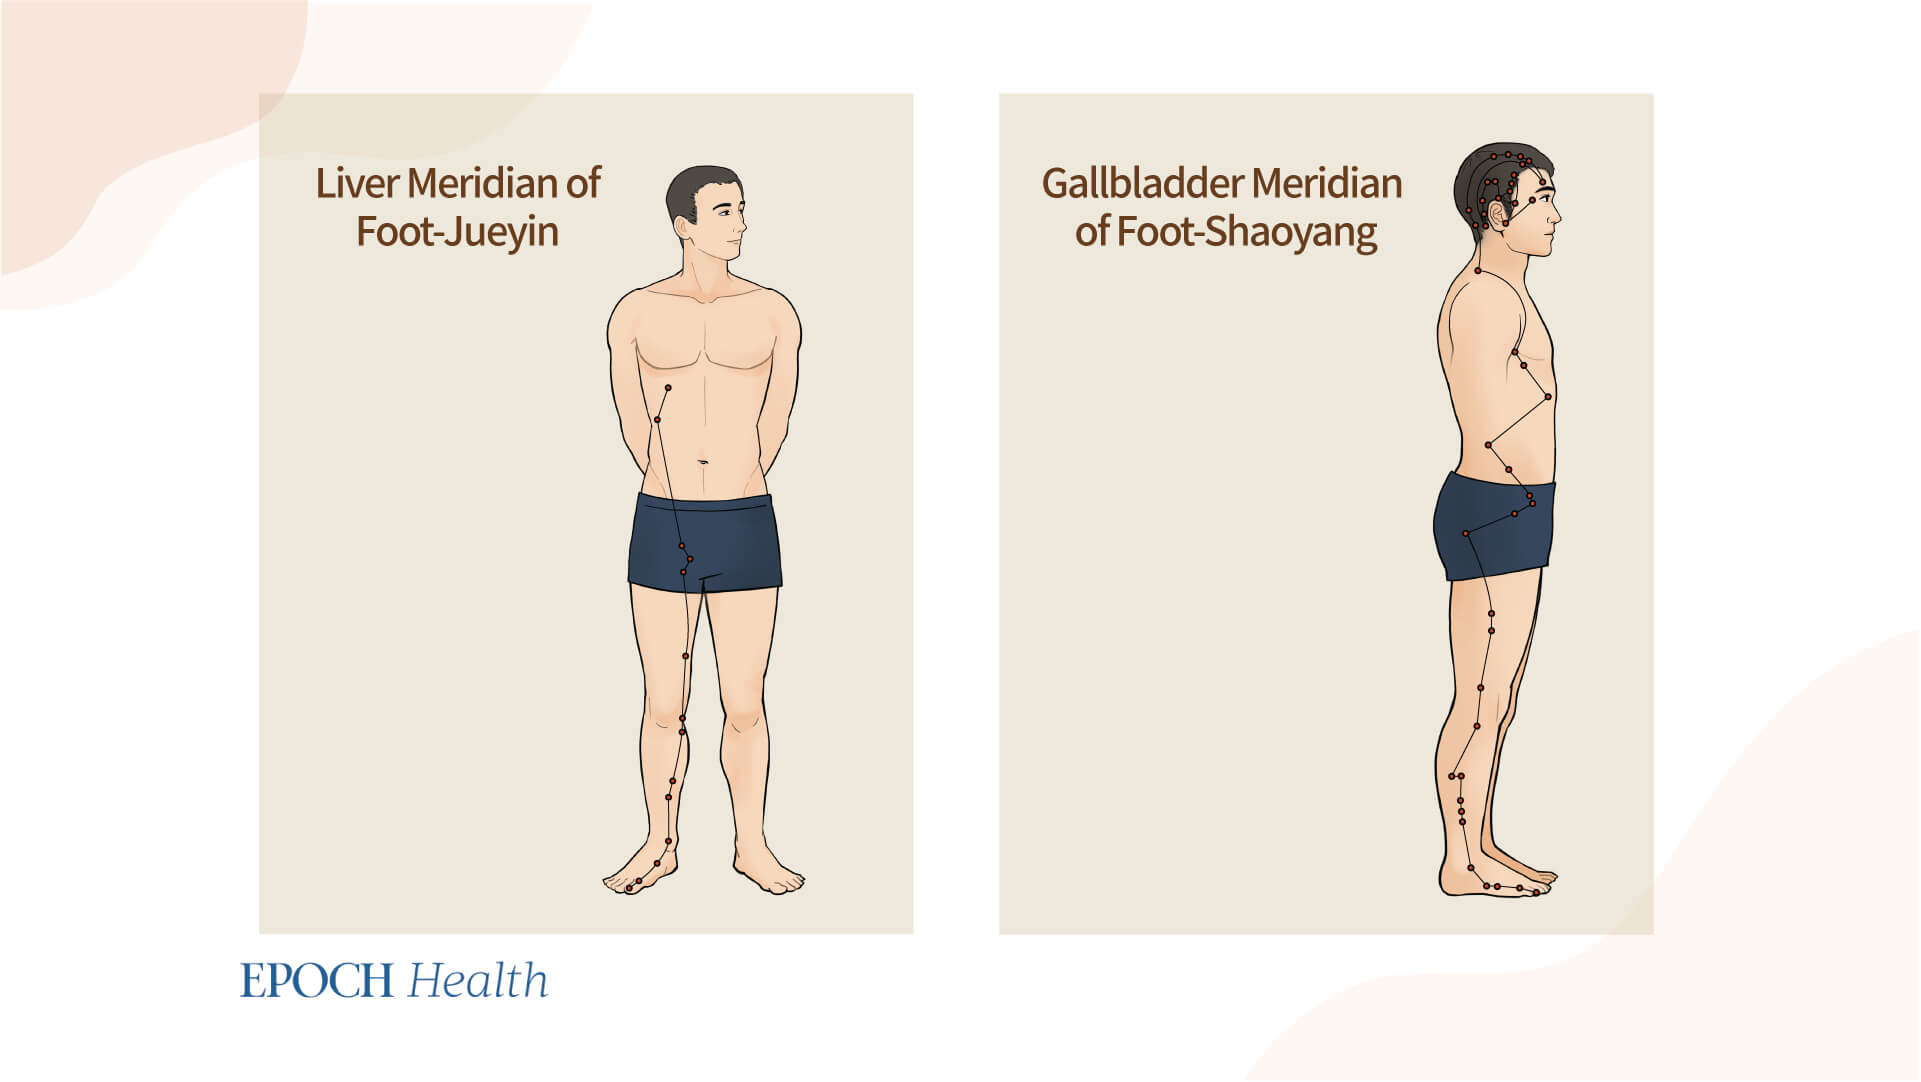 Tapping the liver and gallbladder meridians approximately 100 to 200 times every day can help improve liver and gallbladder function and promote metabolism.